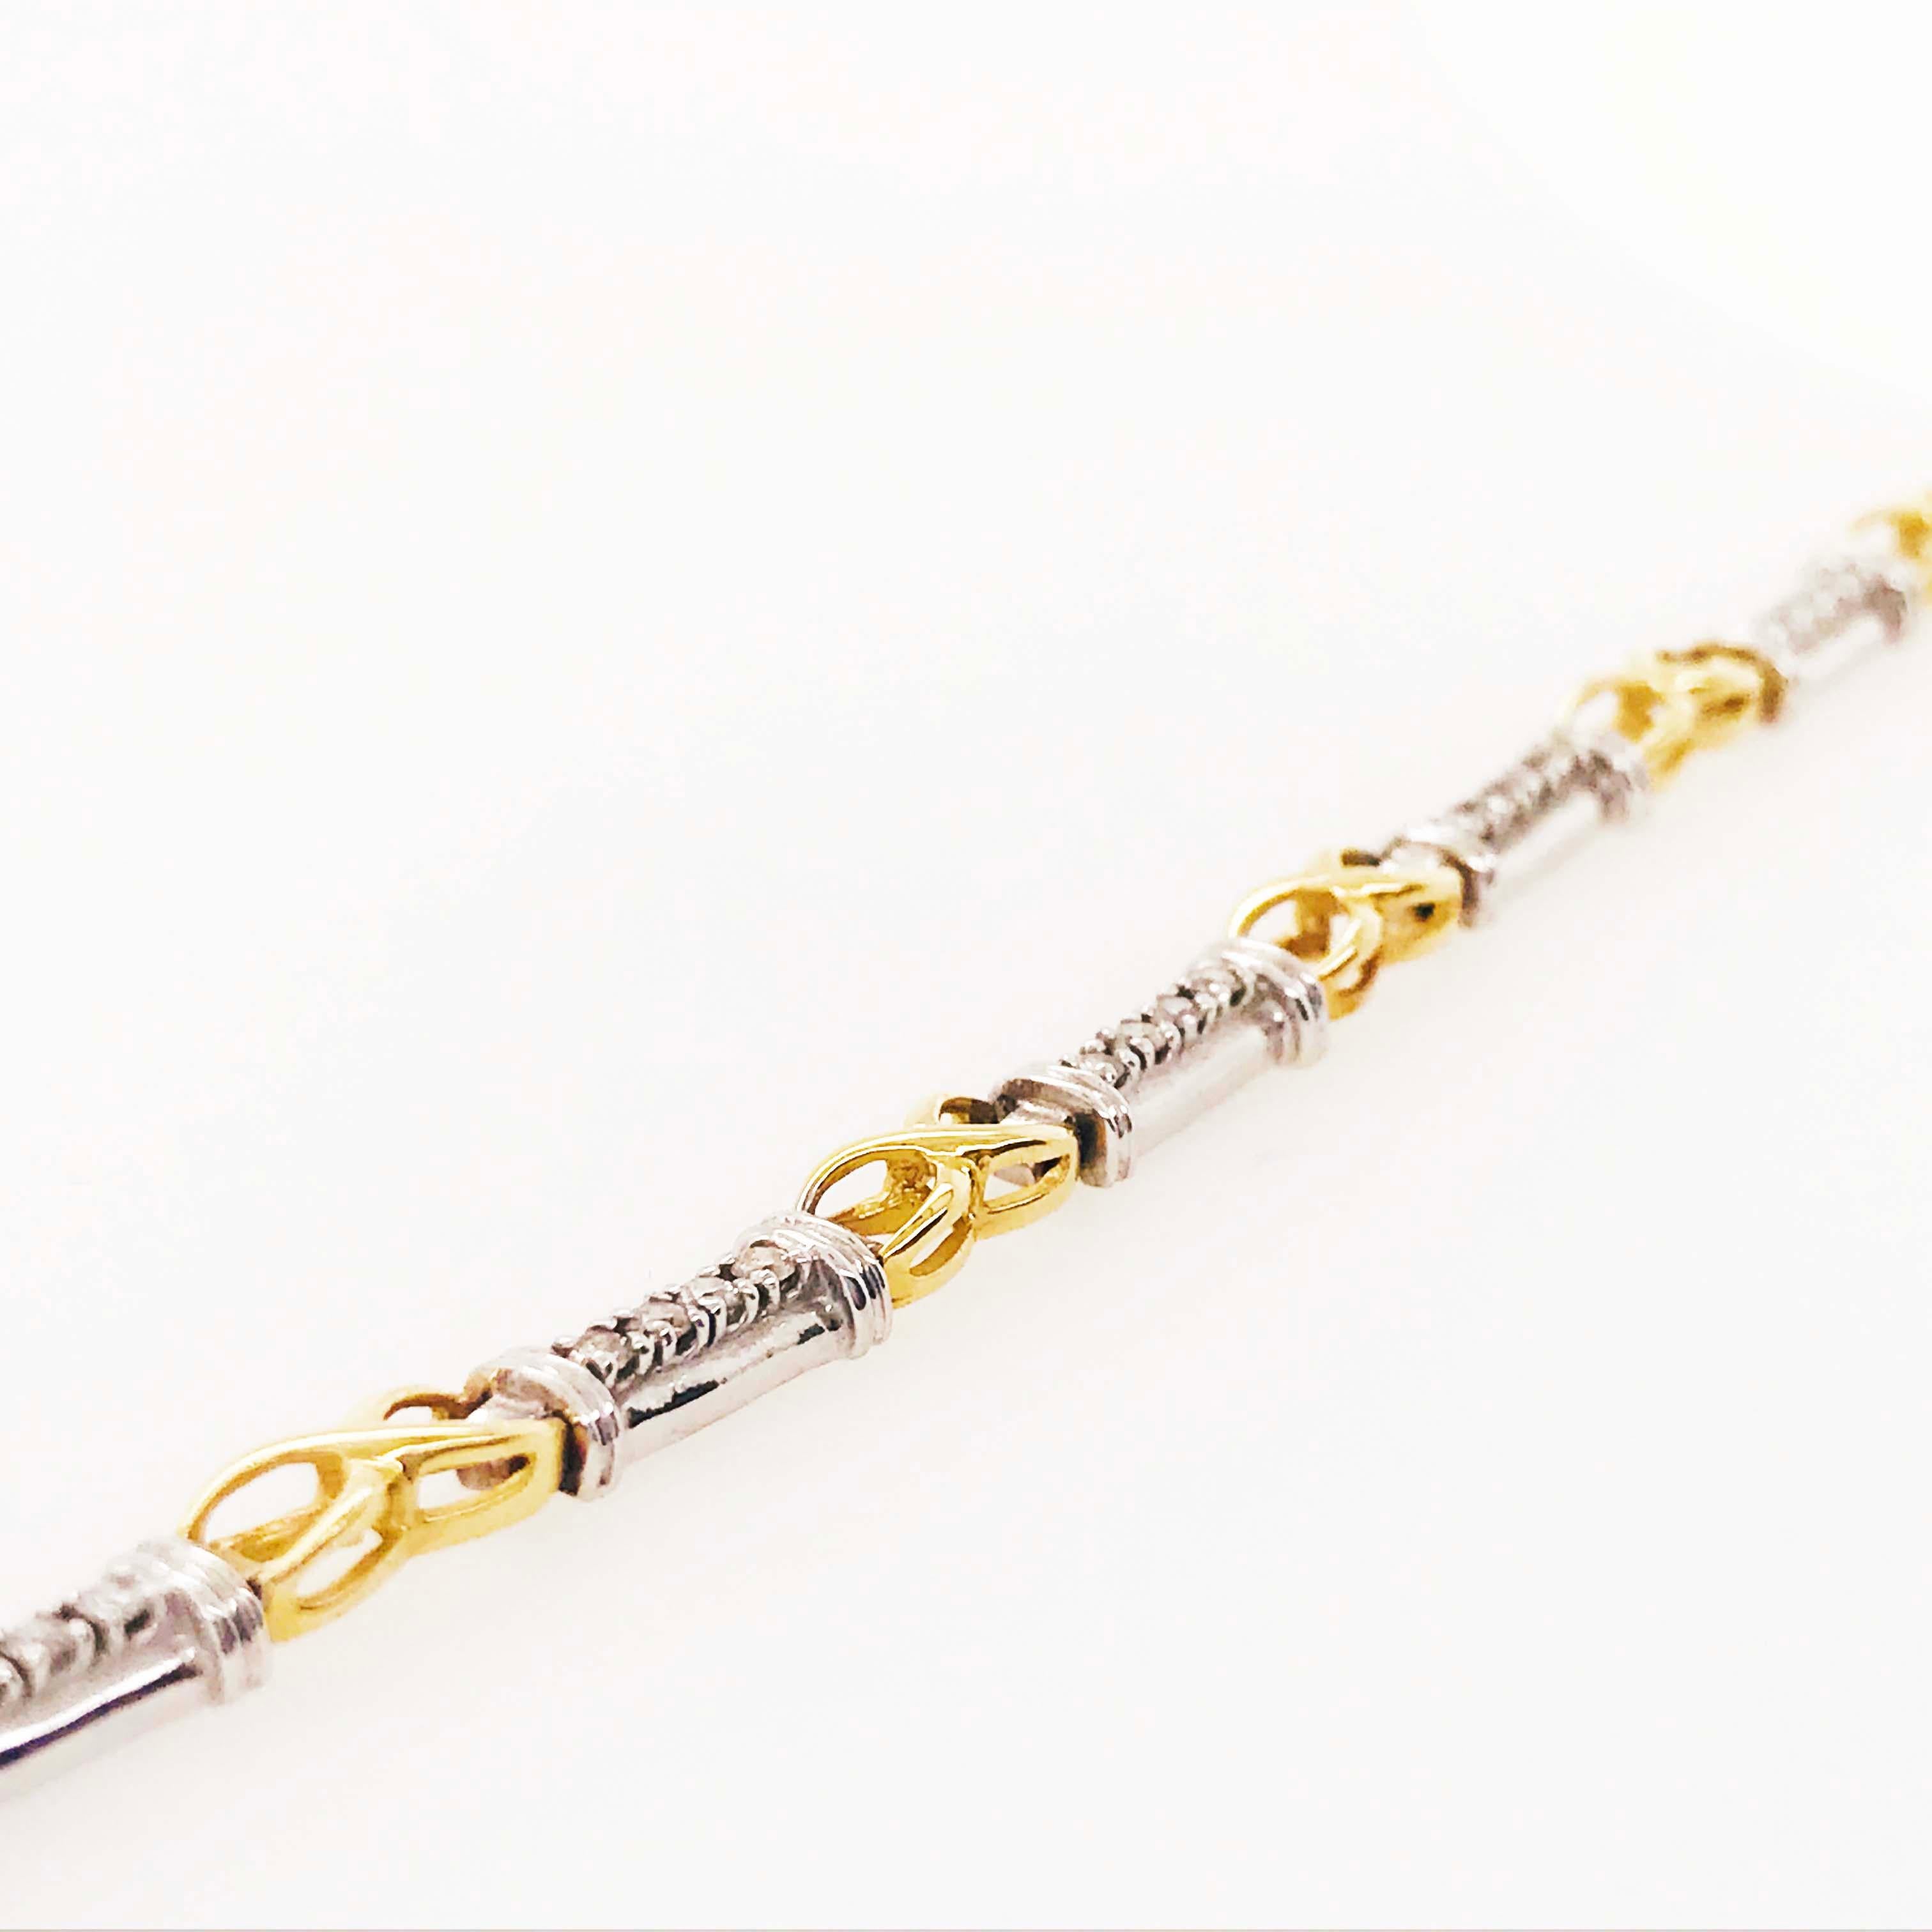 Two-Tone Diamond Bracelet with Alternating White and Yellow Gold Links 1/2 Carat 1